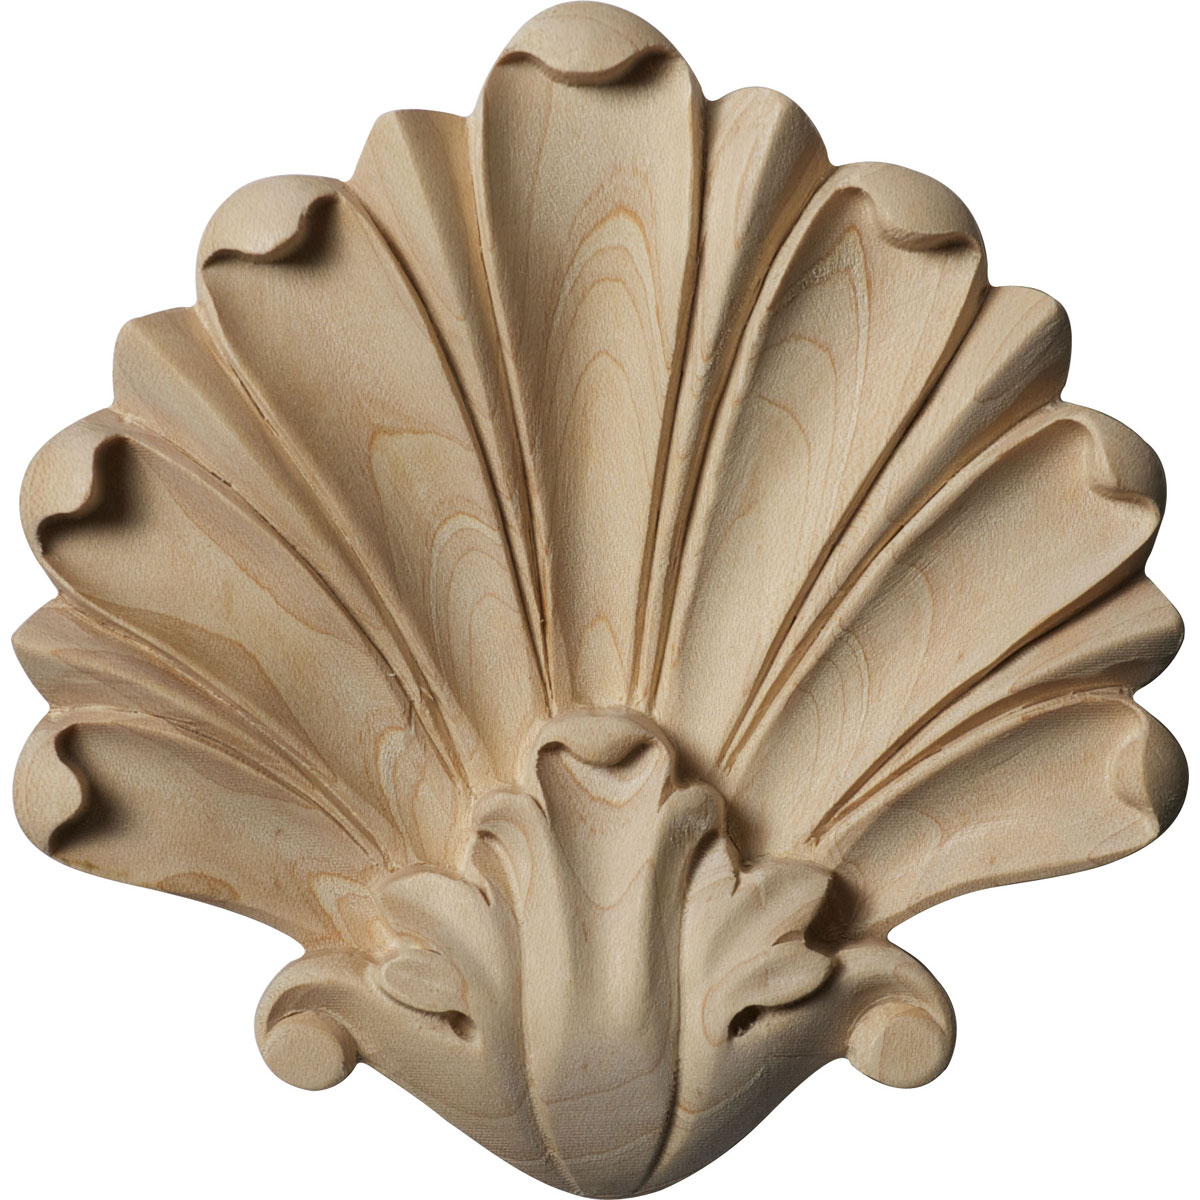 2 Shell shaped Decorative applique onlay resin furniture moulding 